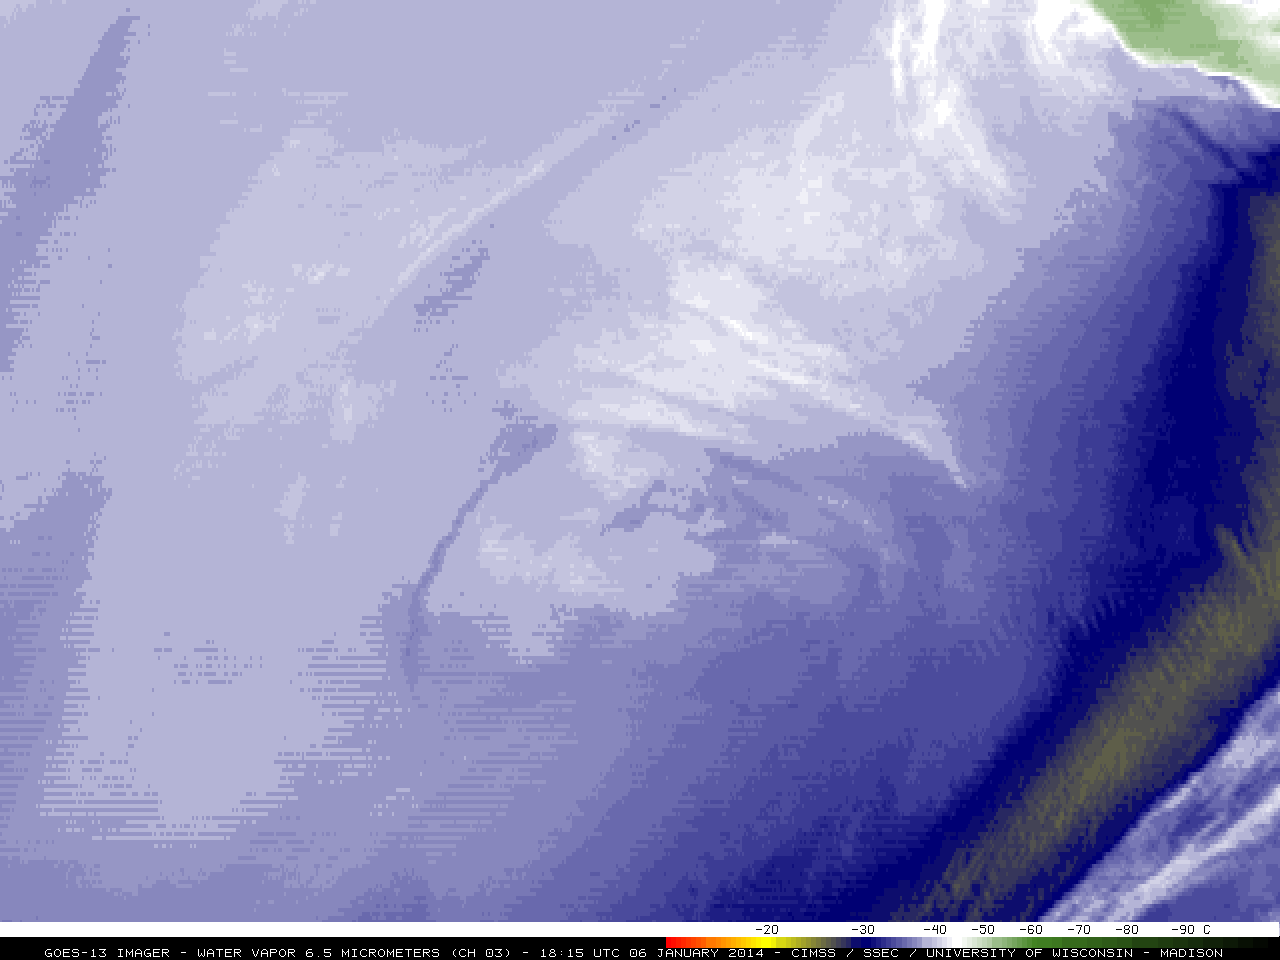 GOES-13 6.5 Âµm water vapor channel images (click to play animation)